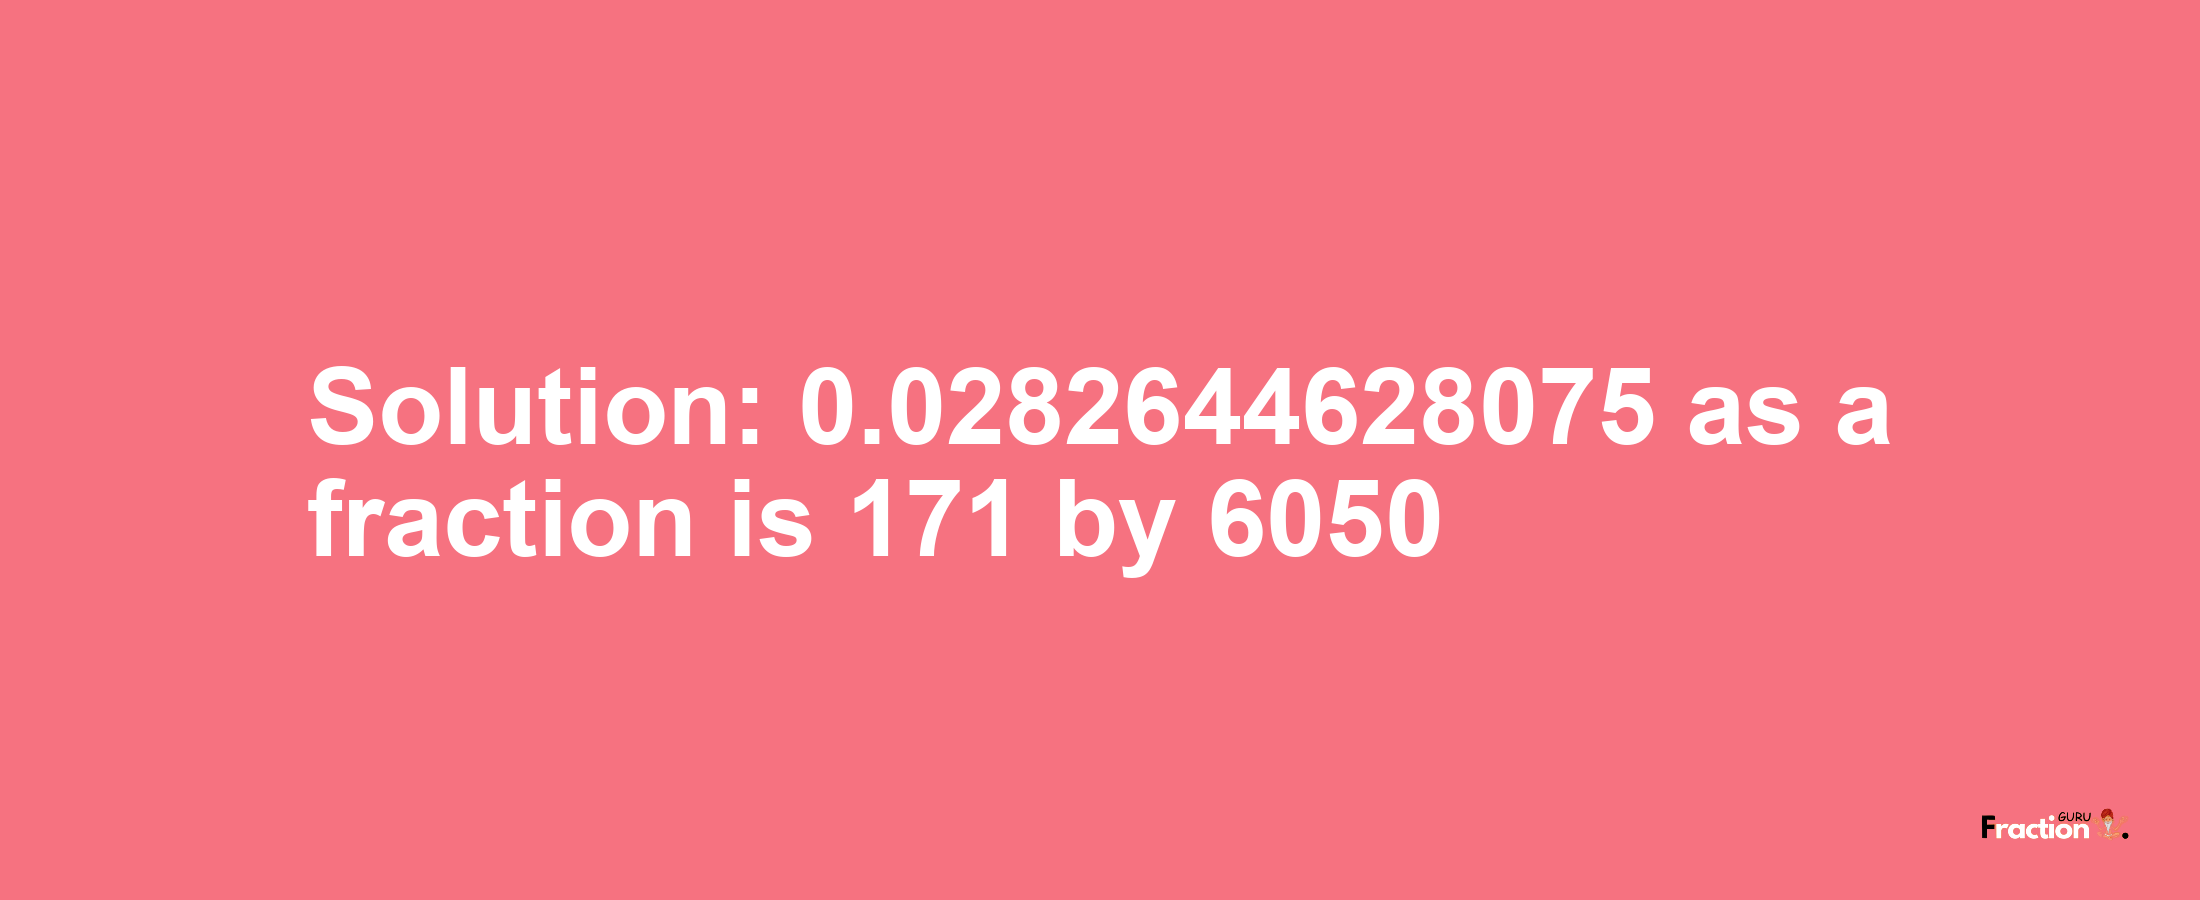 Solution:0.0282644628075 as a fraction is 171/6050